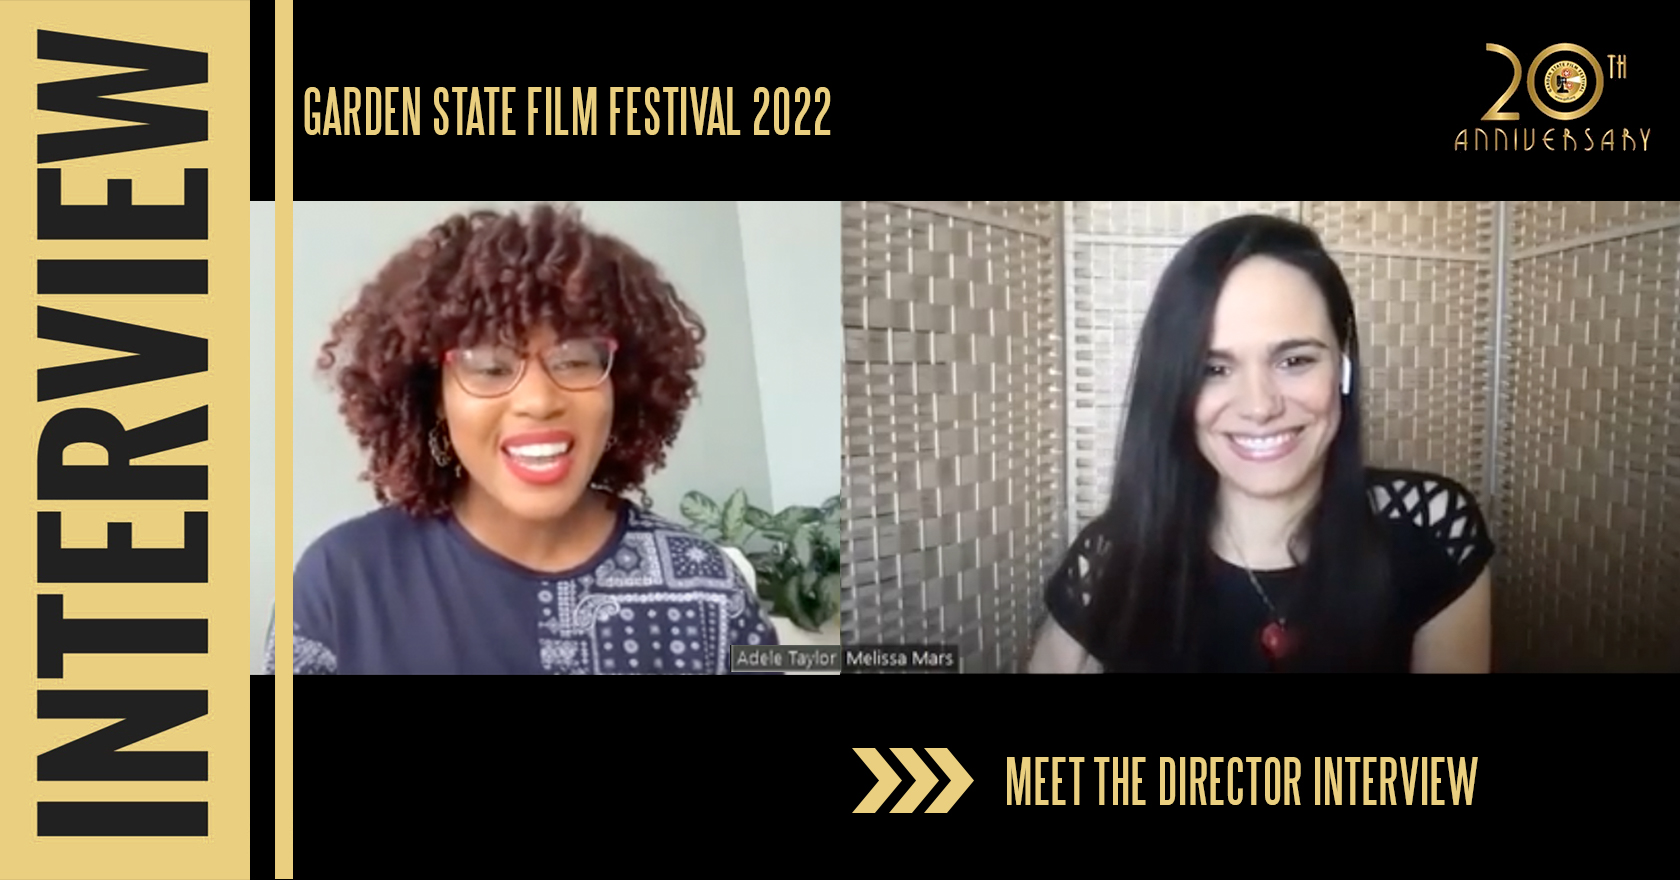 Director’s Interview at the NJ’s Garden State Film Festival